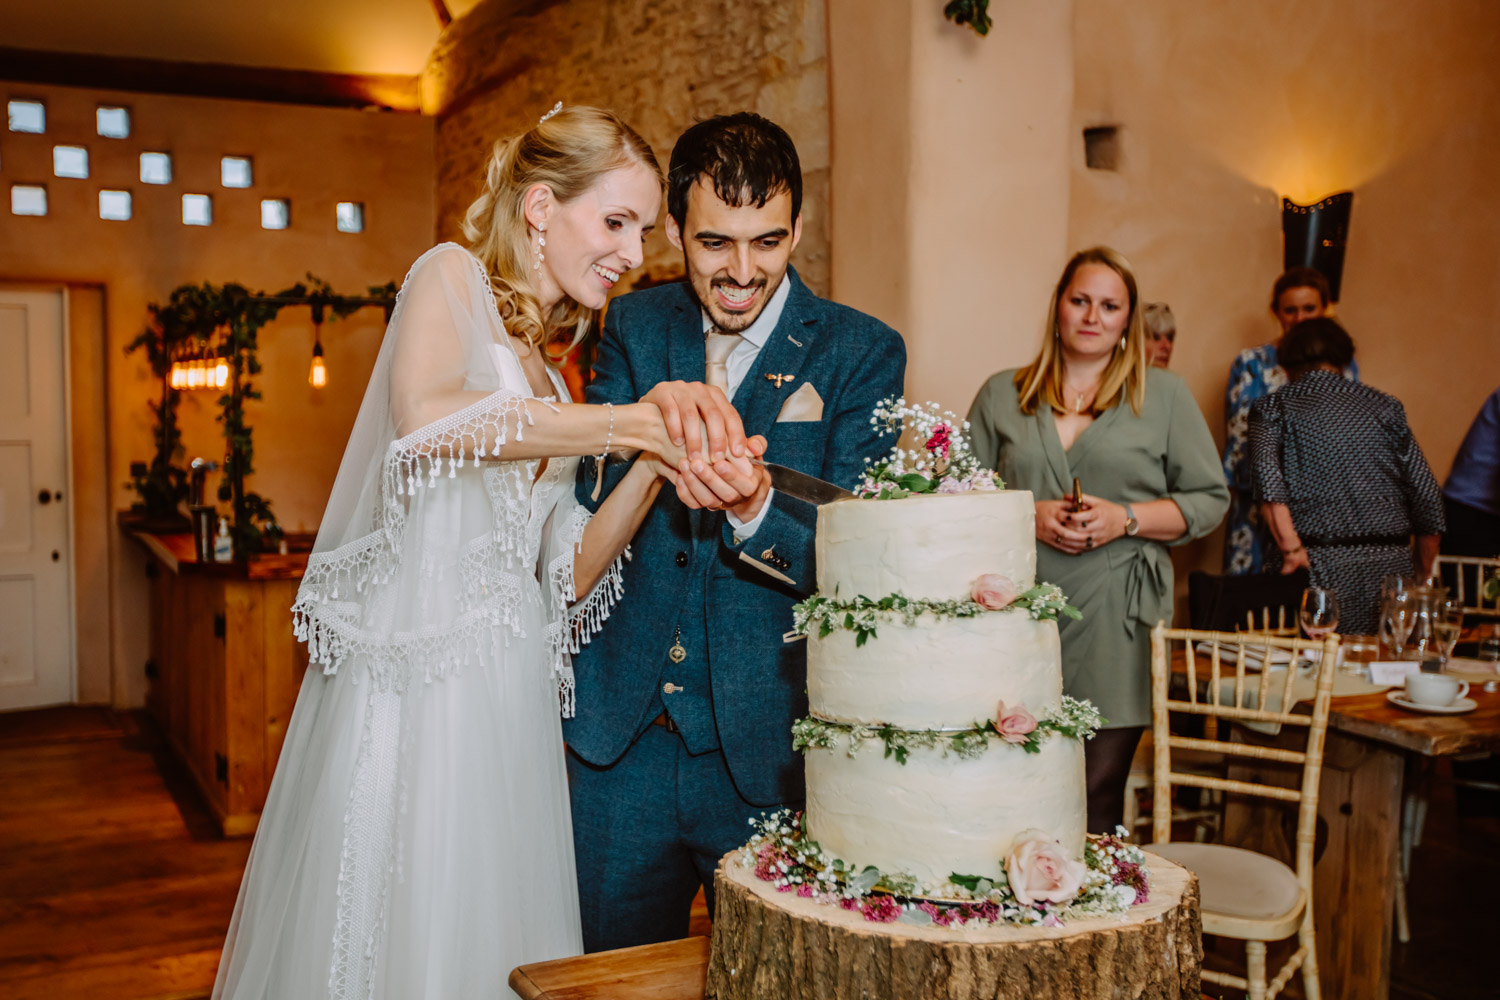 The couple cuts their wedding cake 